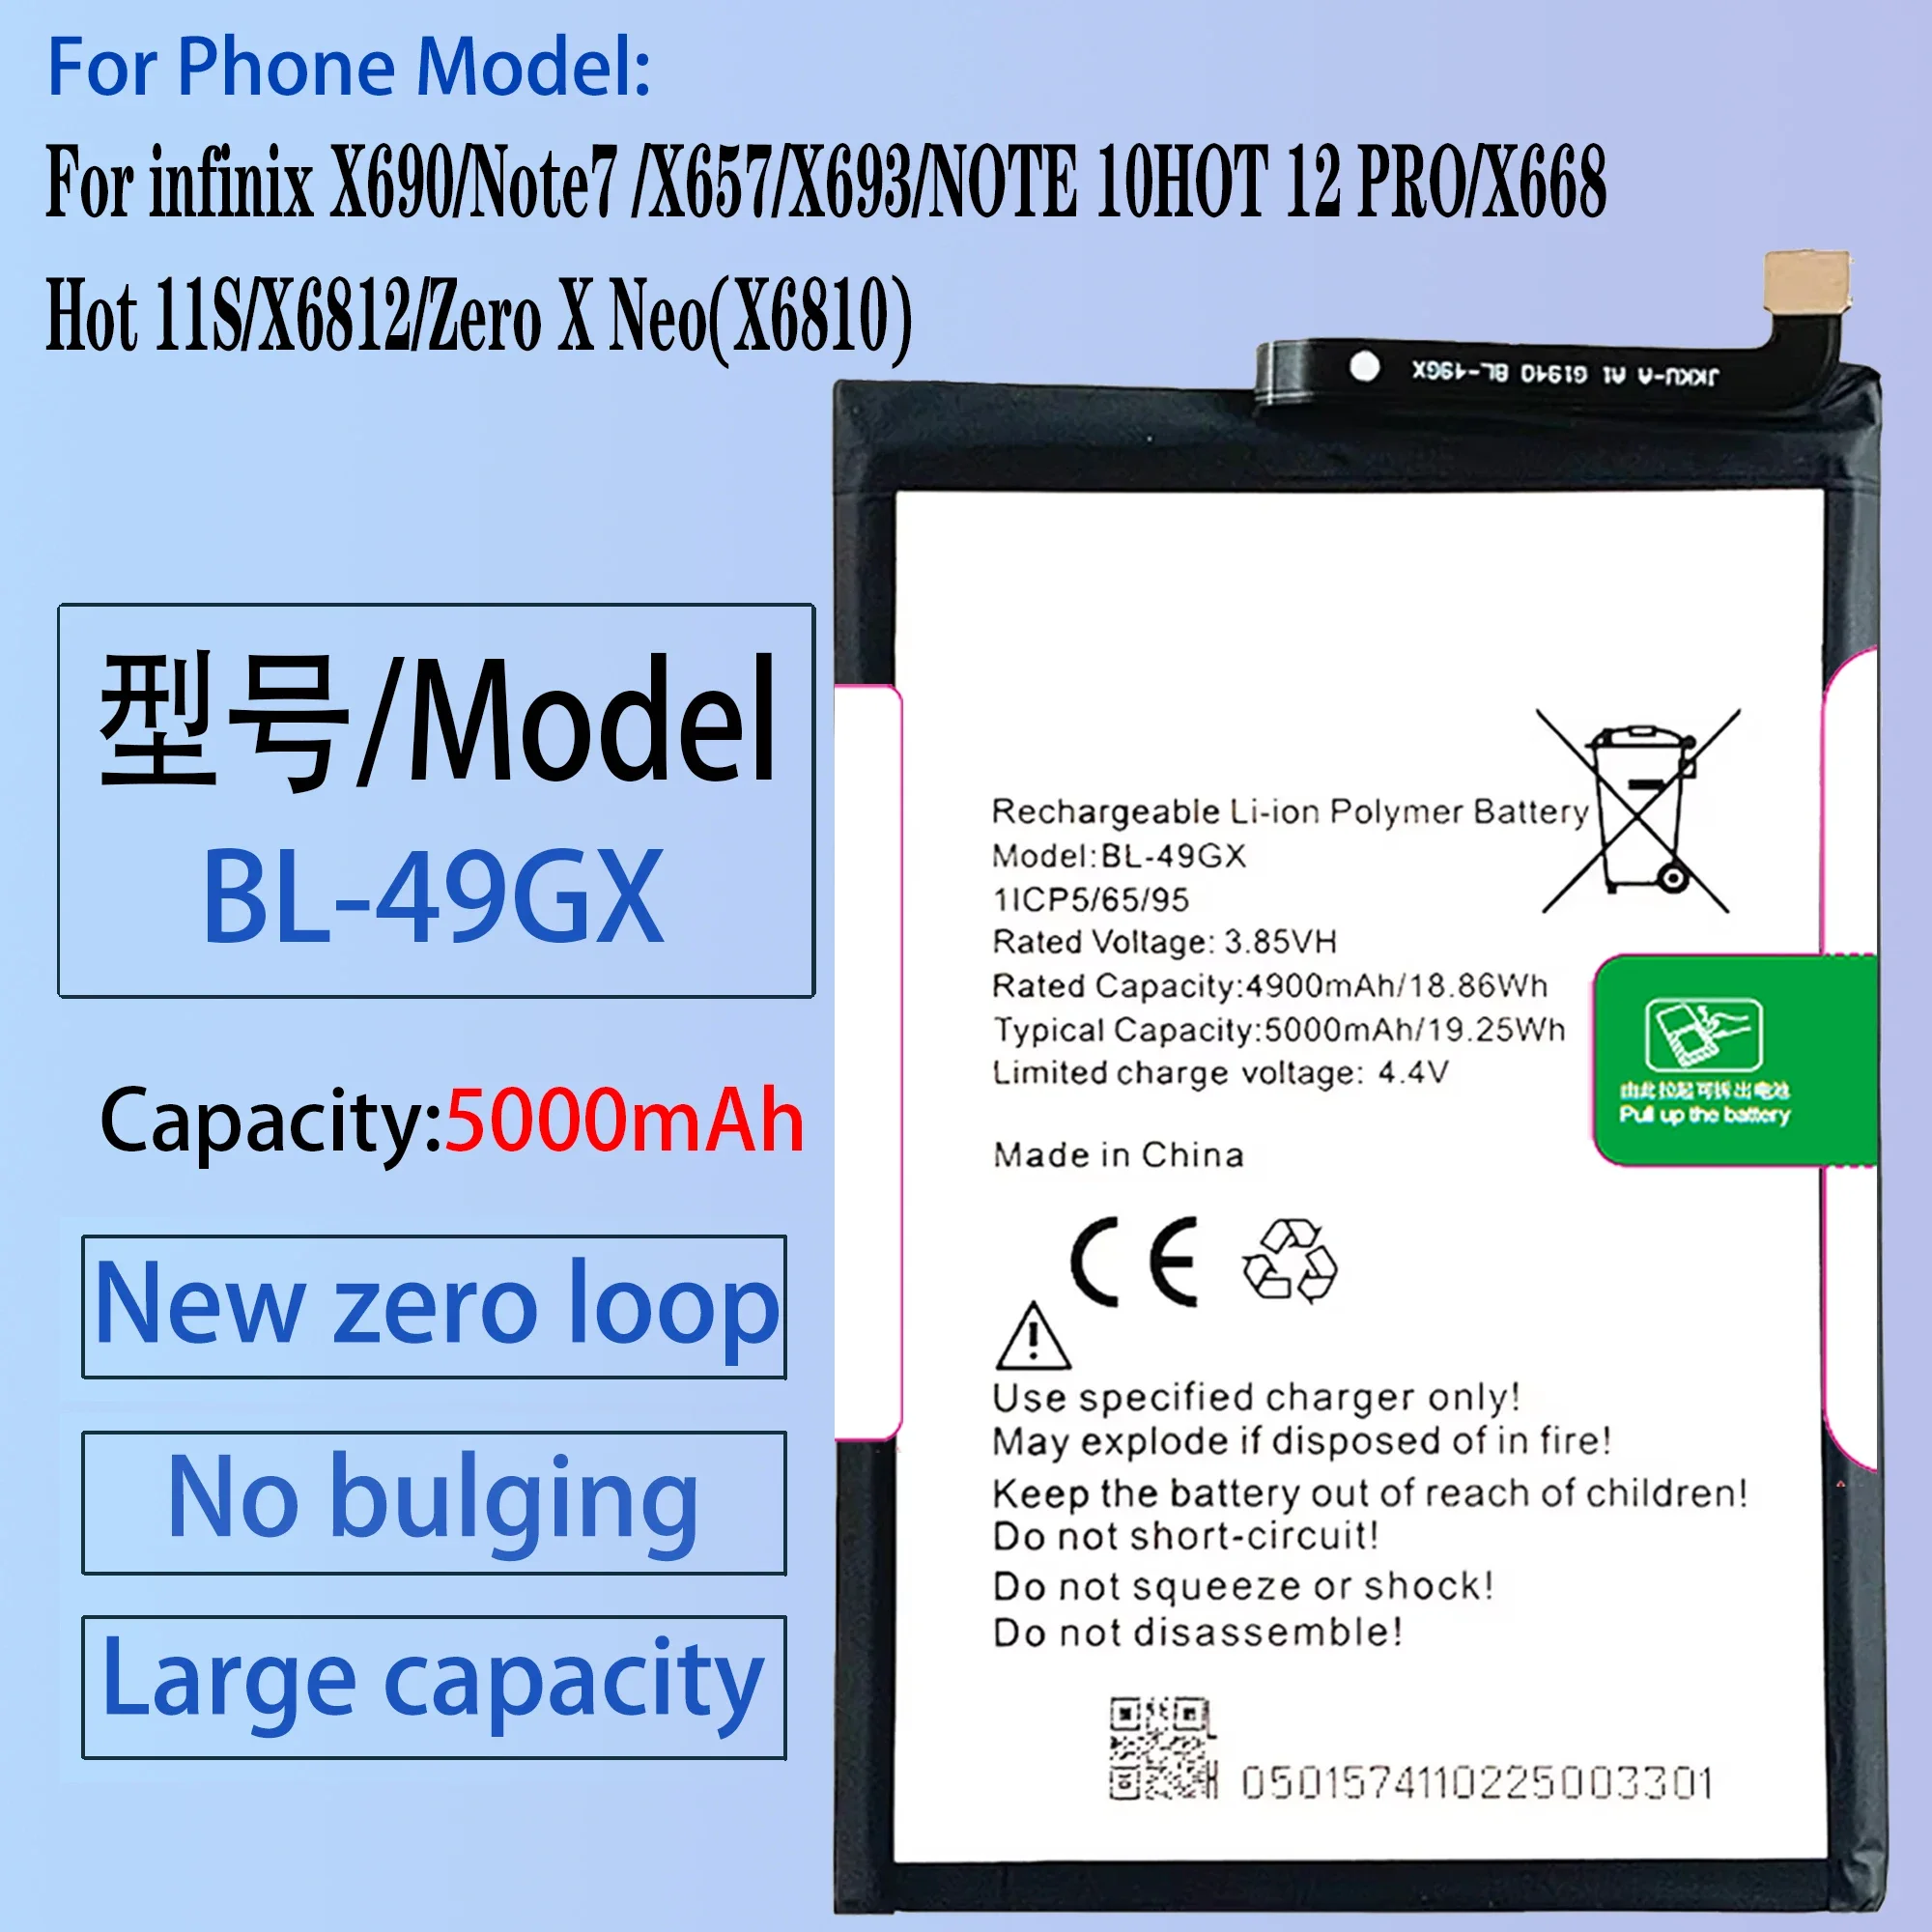 

100% Original BL-49GX Battery For INFINIX X690/Note7 /X693/NOTE 10/Hot 11S/Zero X Neo(X6810) Phone Replacement Bateria+Tools